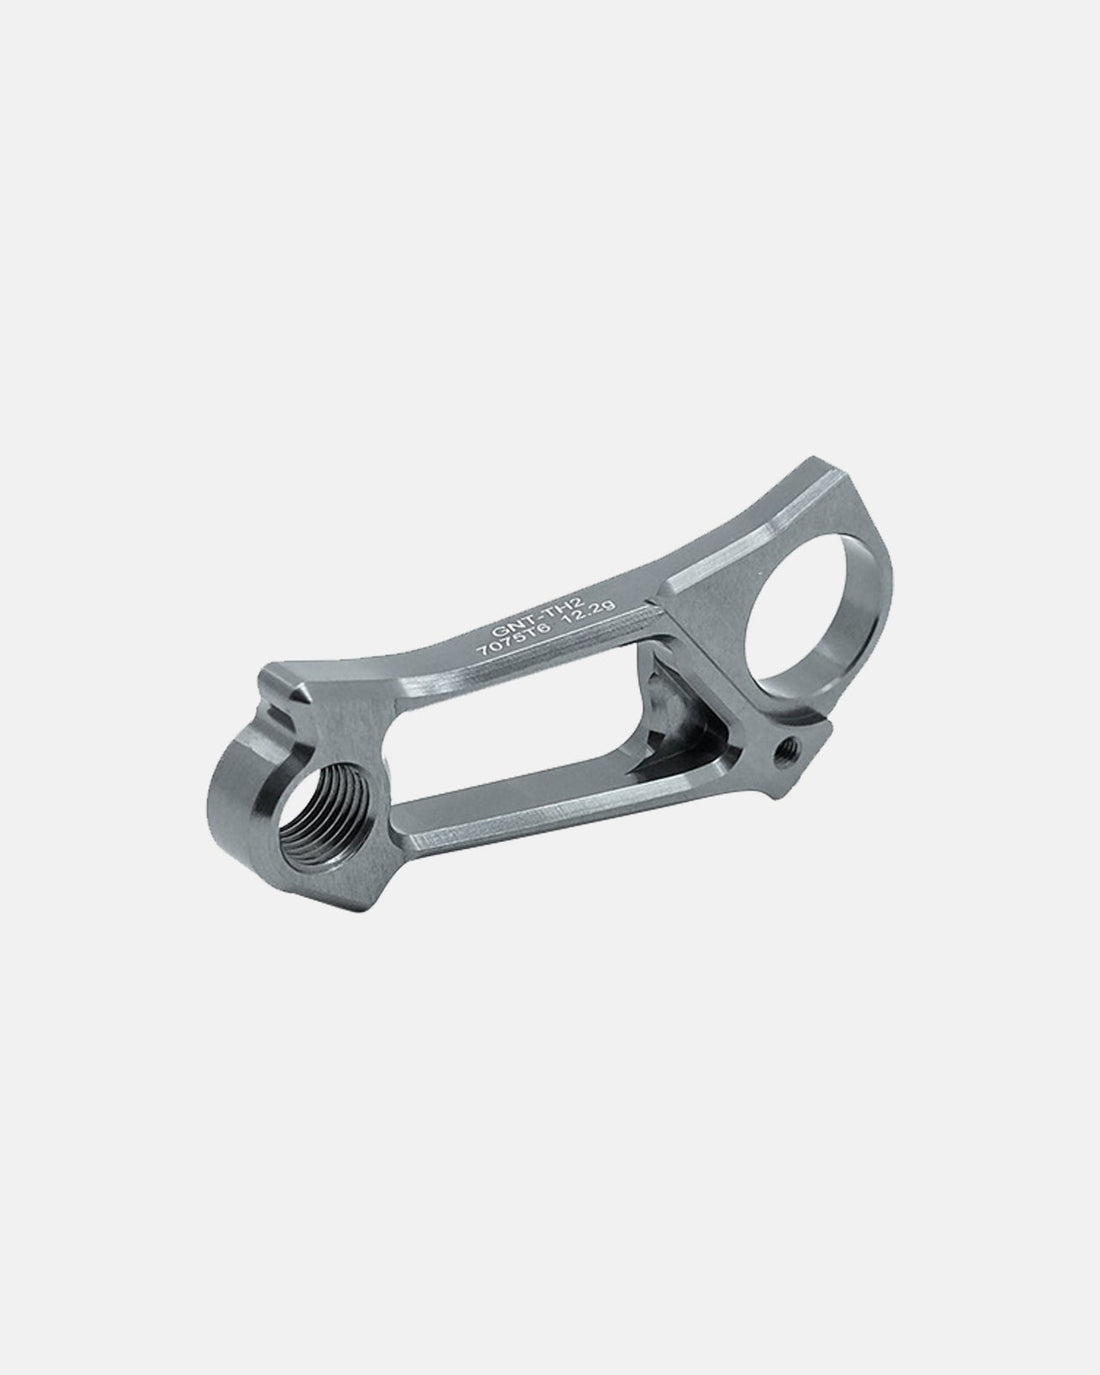 Sigeyi Giant TCR Direct-Mount Derailleur Hanger - Disc